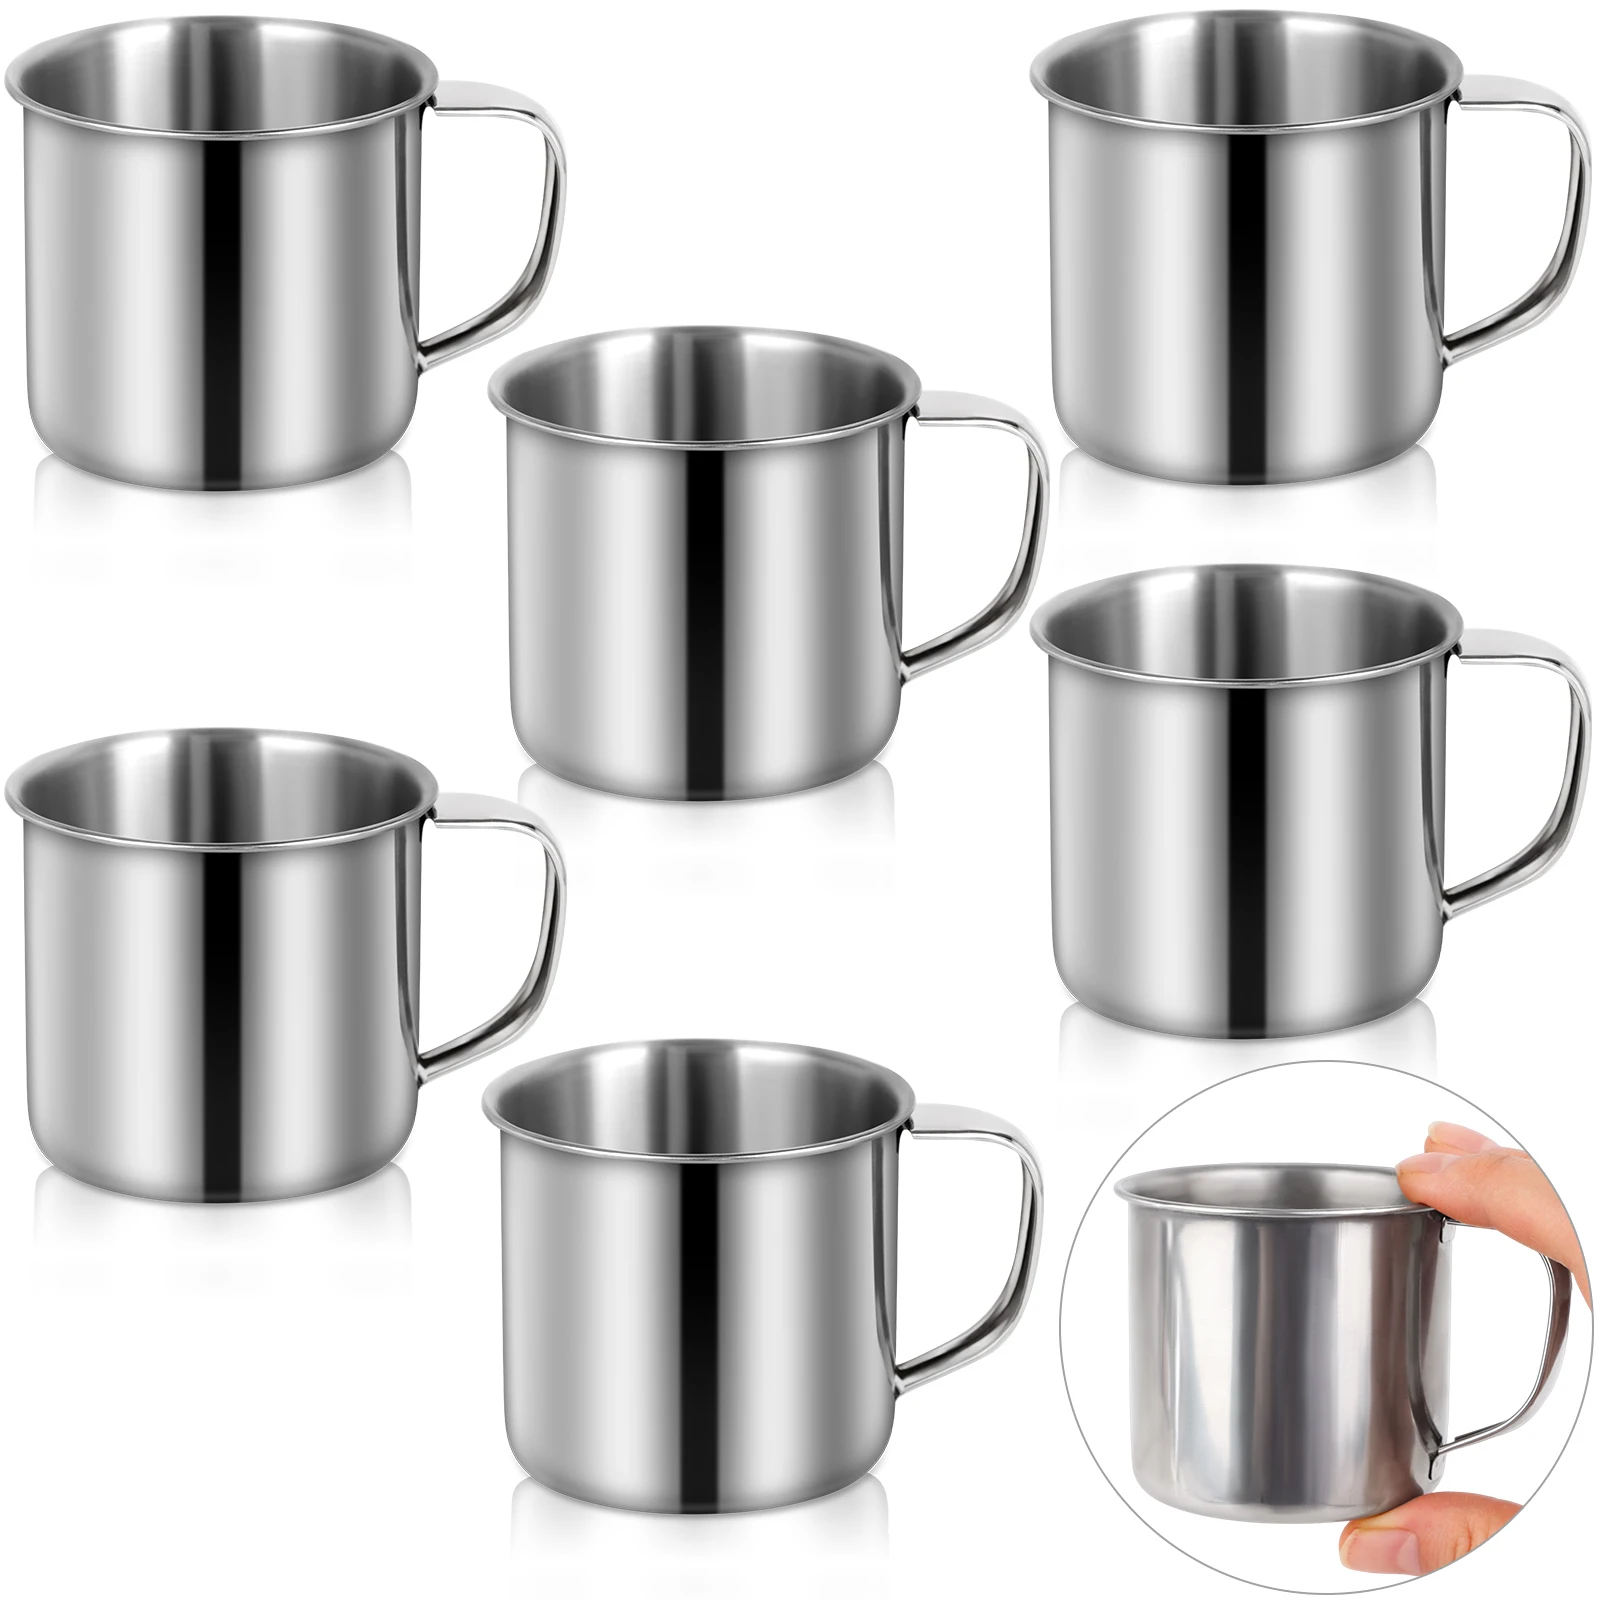 

6Pcs Stainless Steel Coffee Cup With Handle Stainless Steel Espresso Cups 5.07oz/150ml Camping Coffee Mugs Metal Coffee Mug Tea